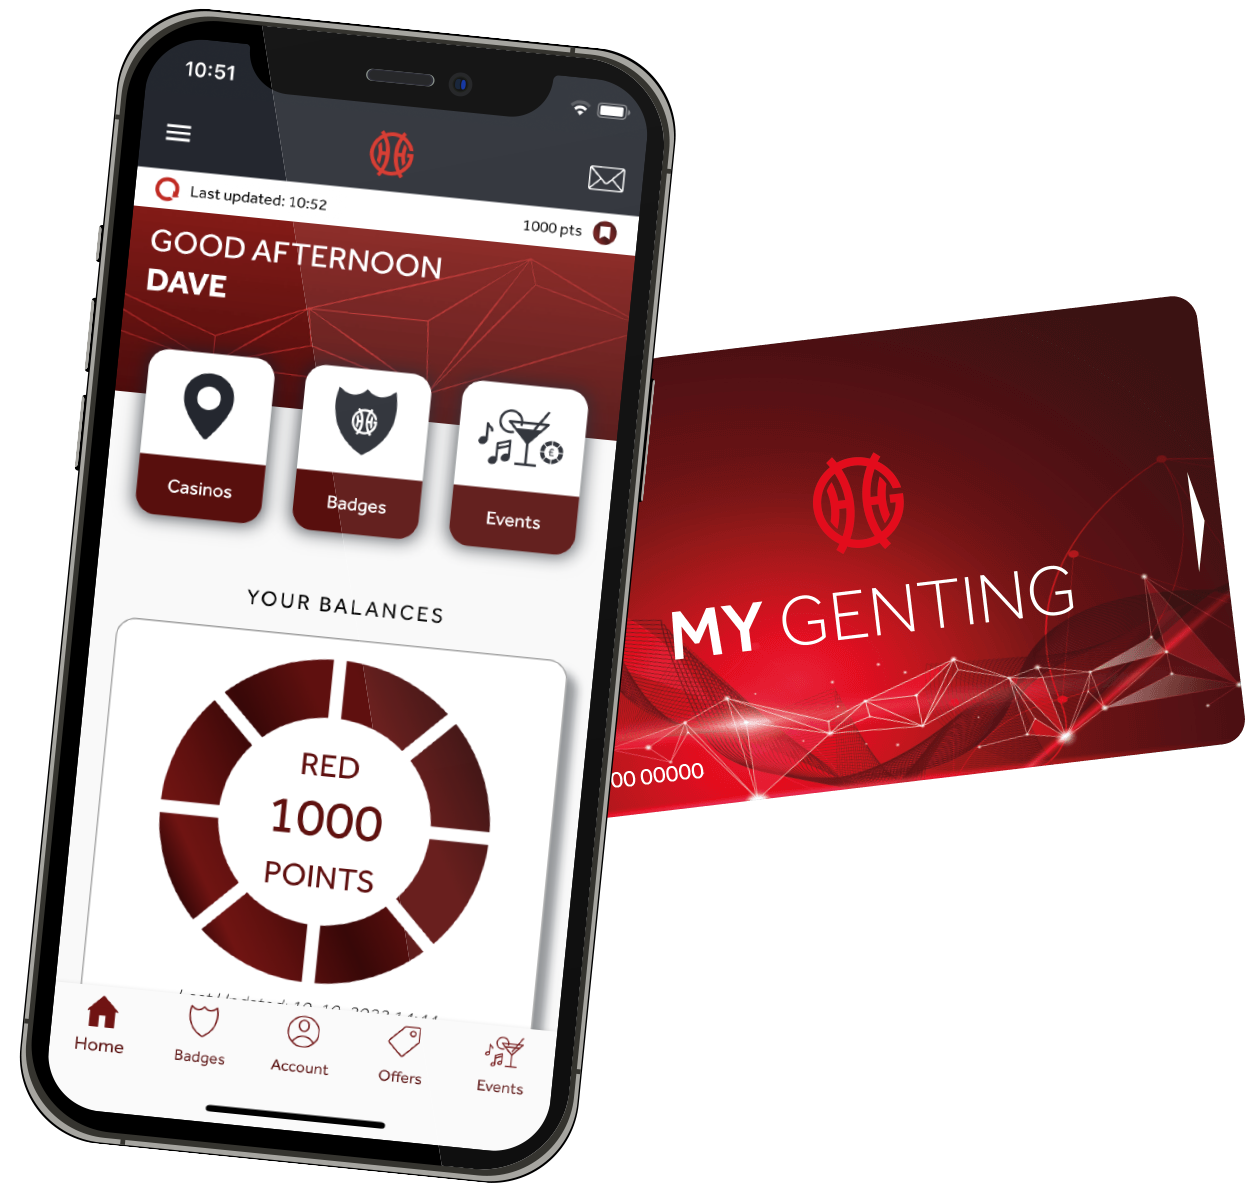 MyGenting membership card and app showing on mobile phone